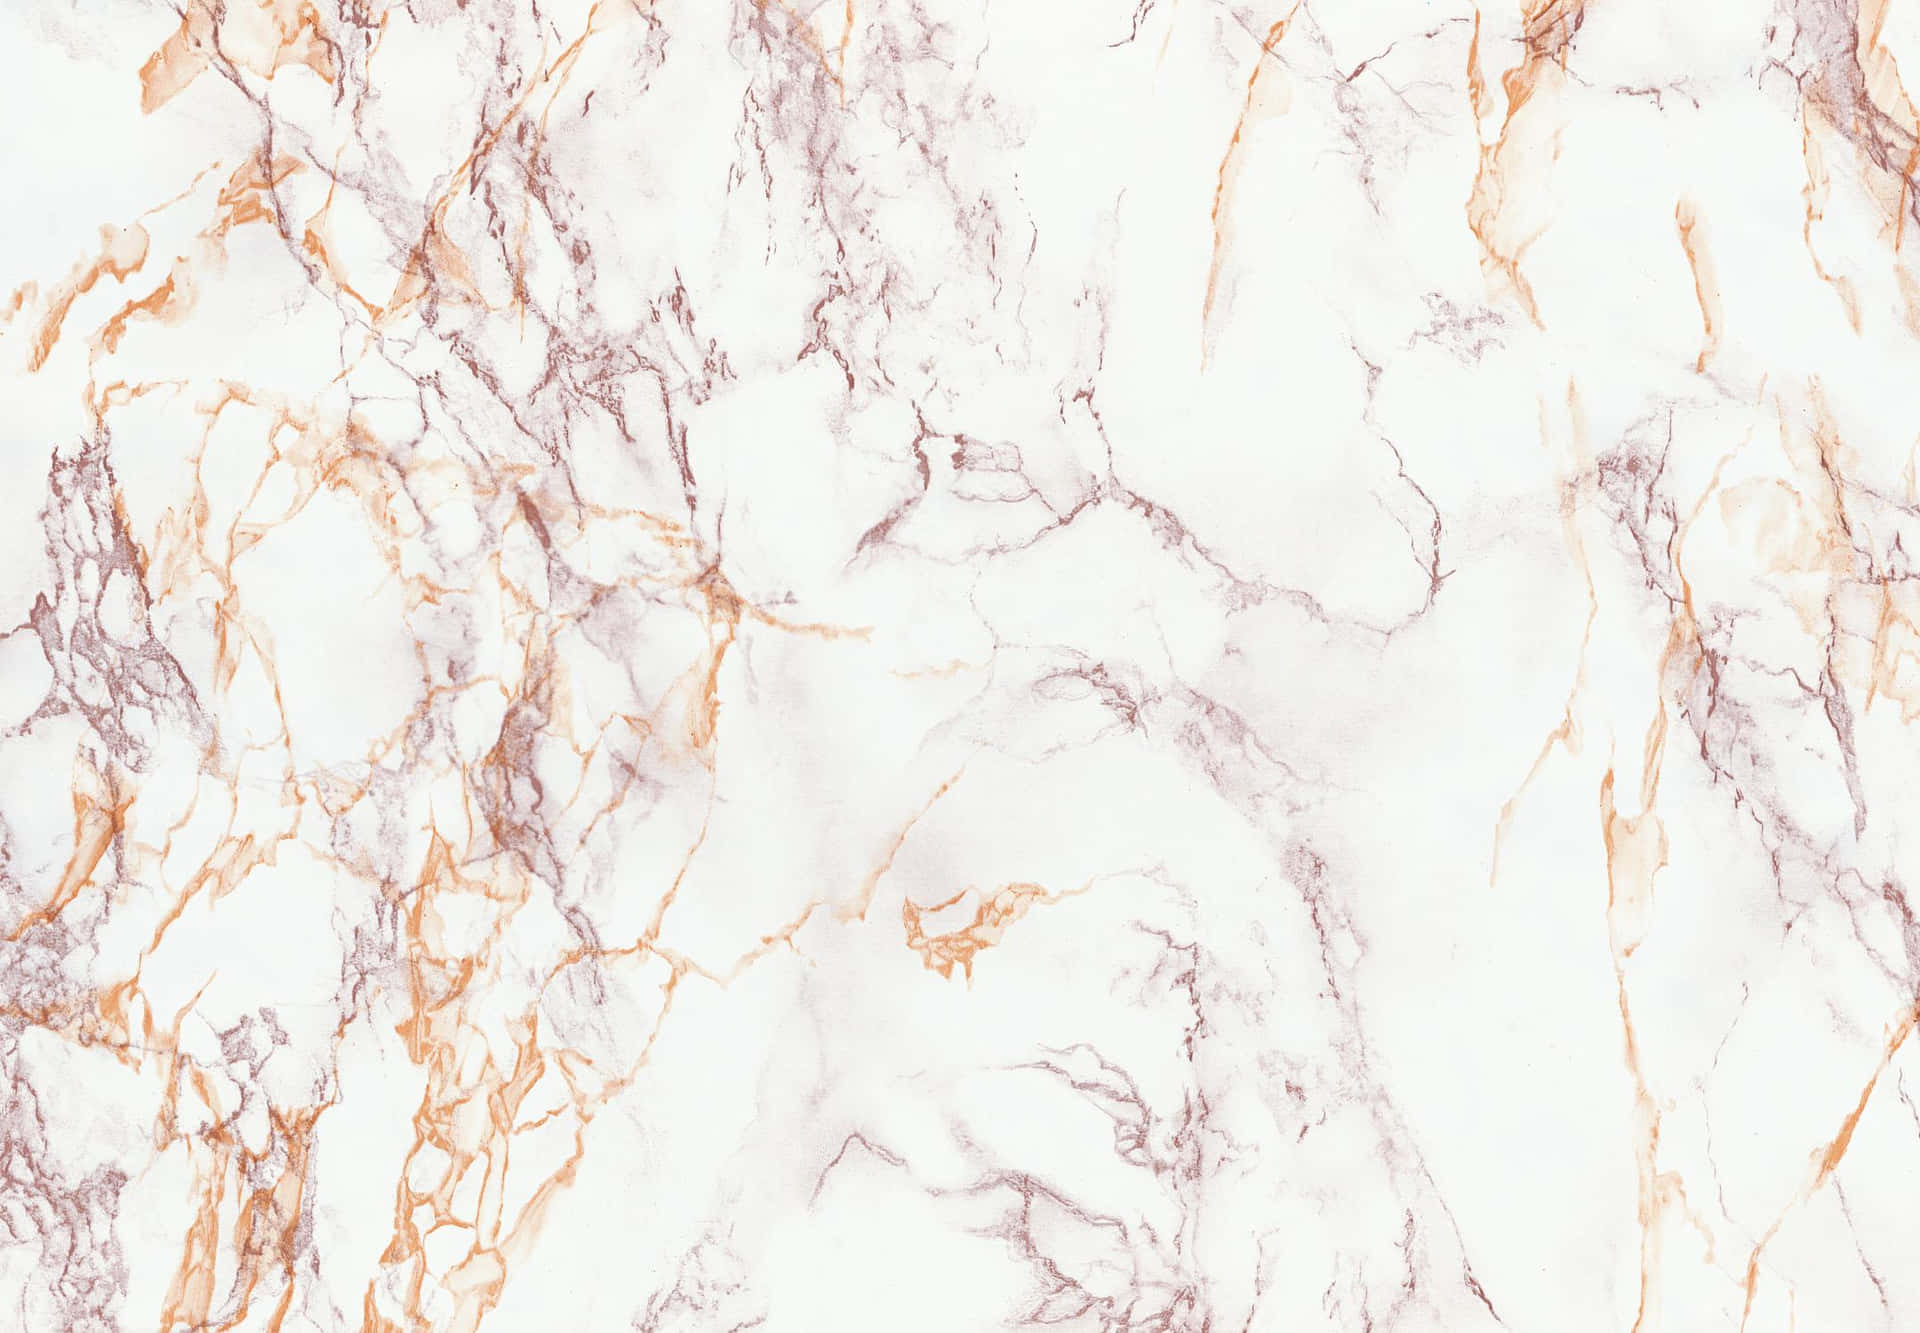 The Pure White Beauty of Marble